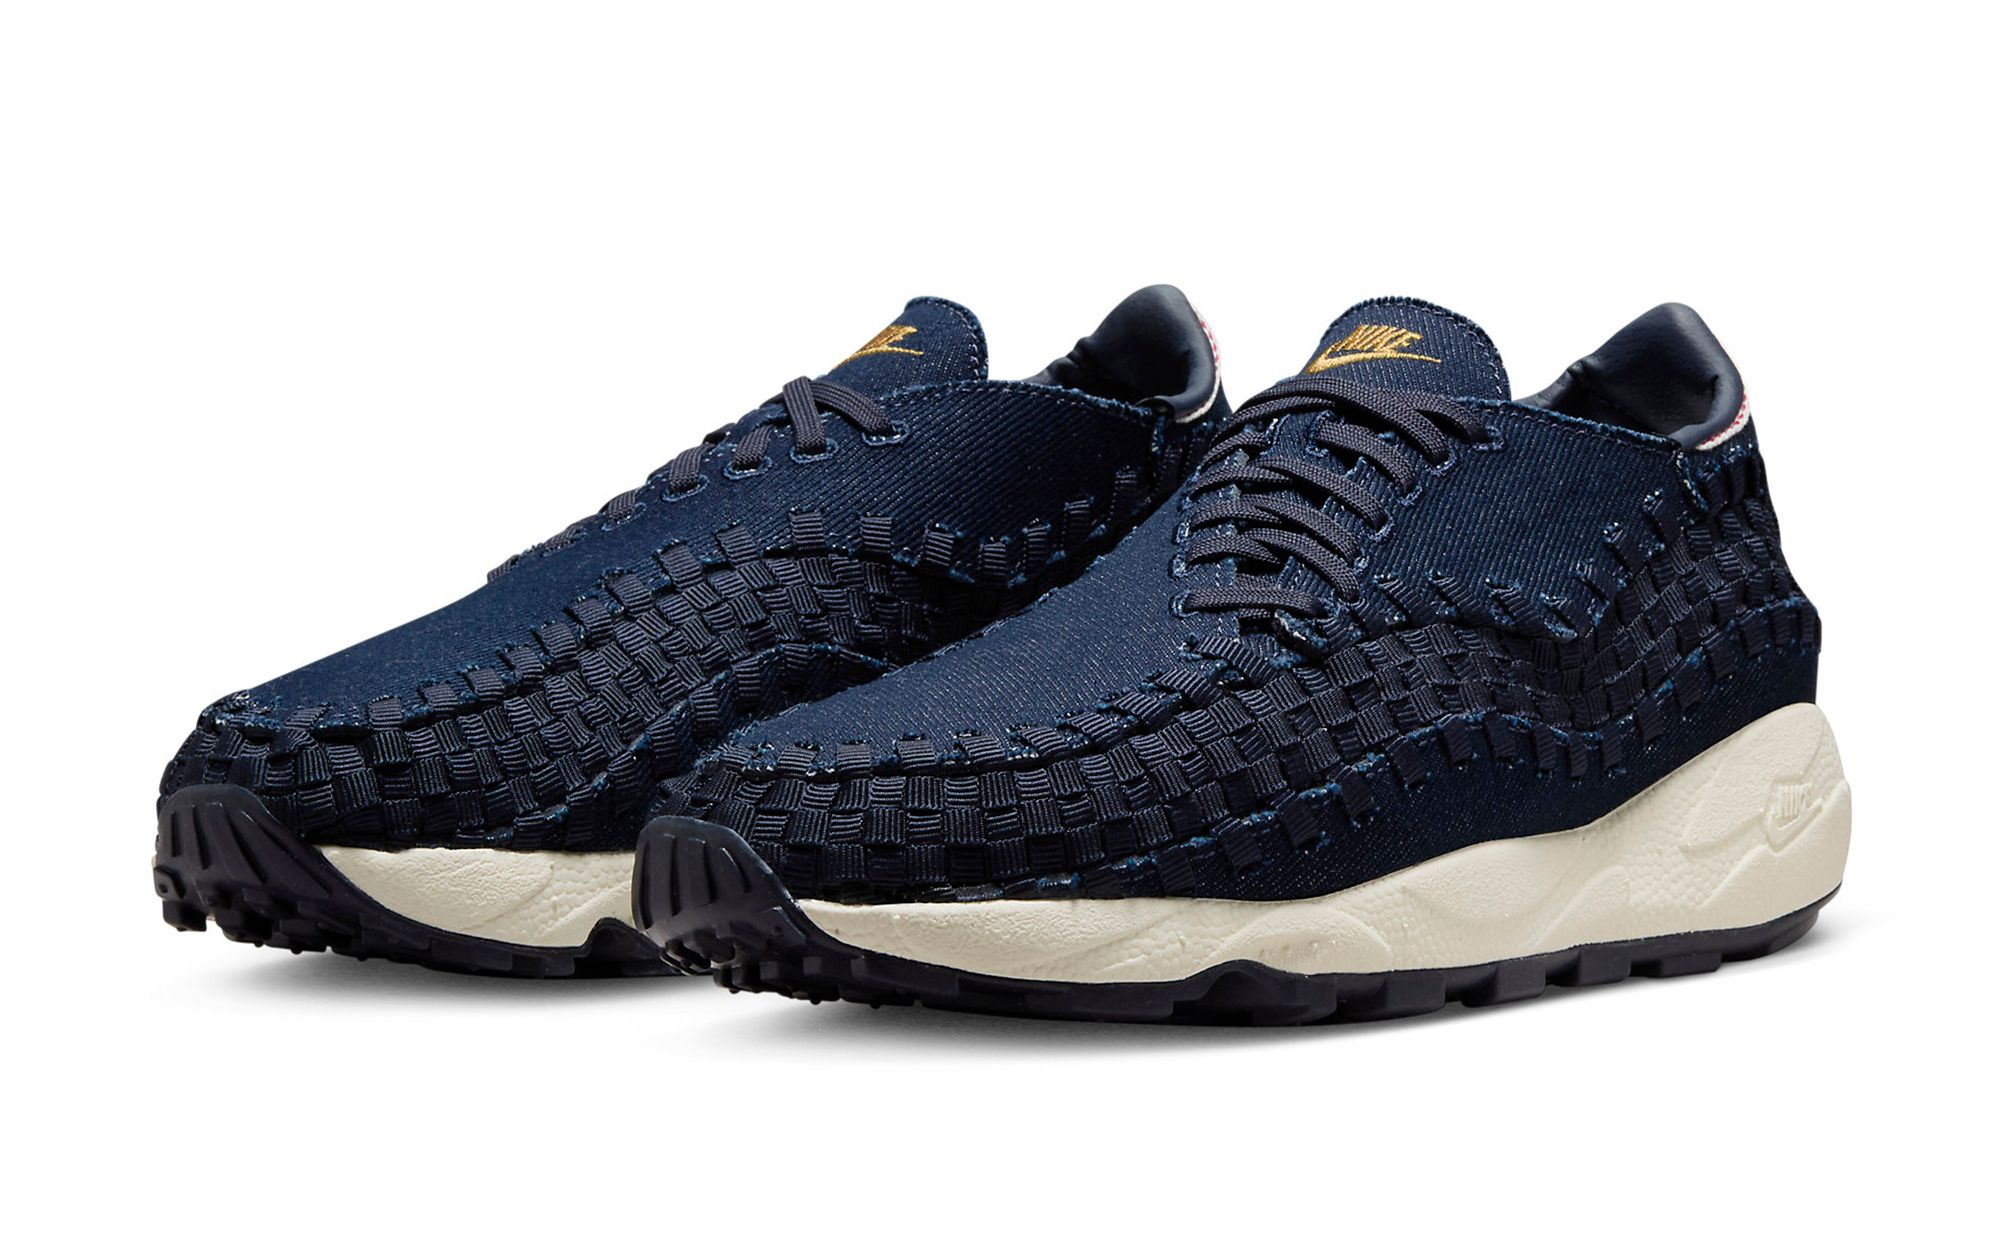 Nike Delivers the Air Footscape Woven in Denim | House of Heat°